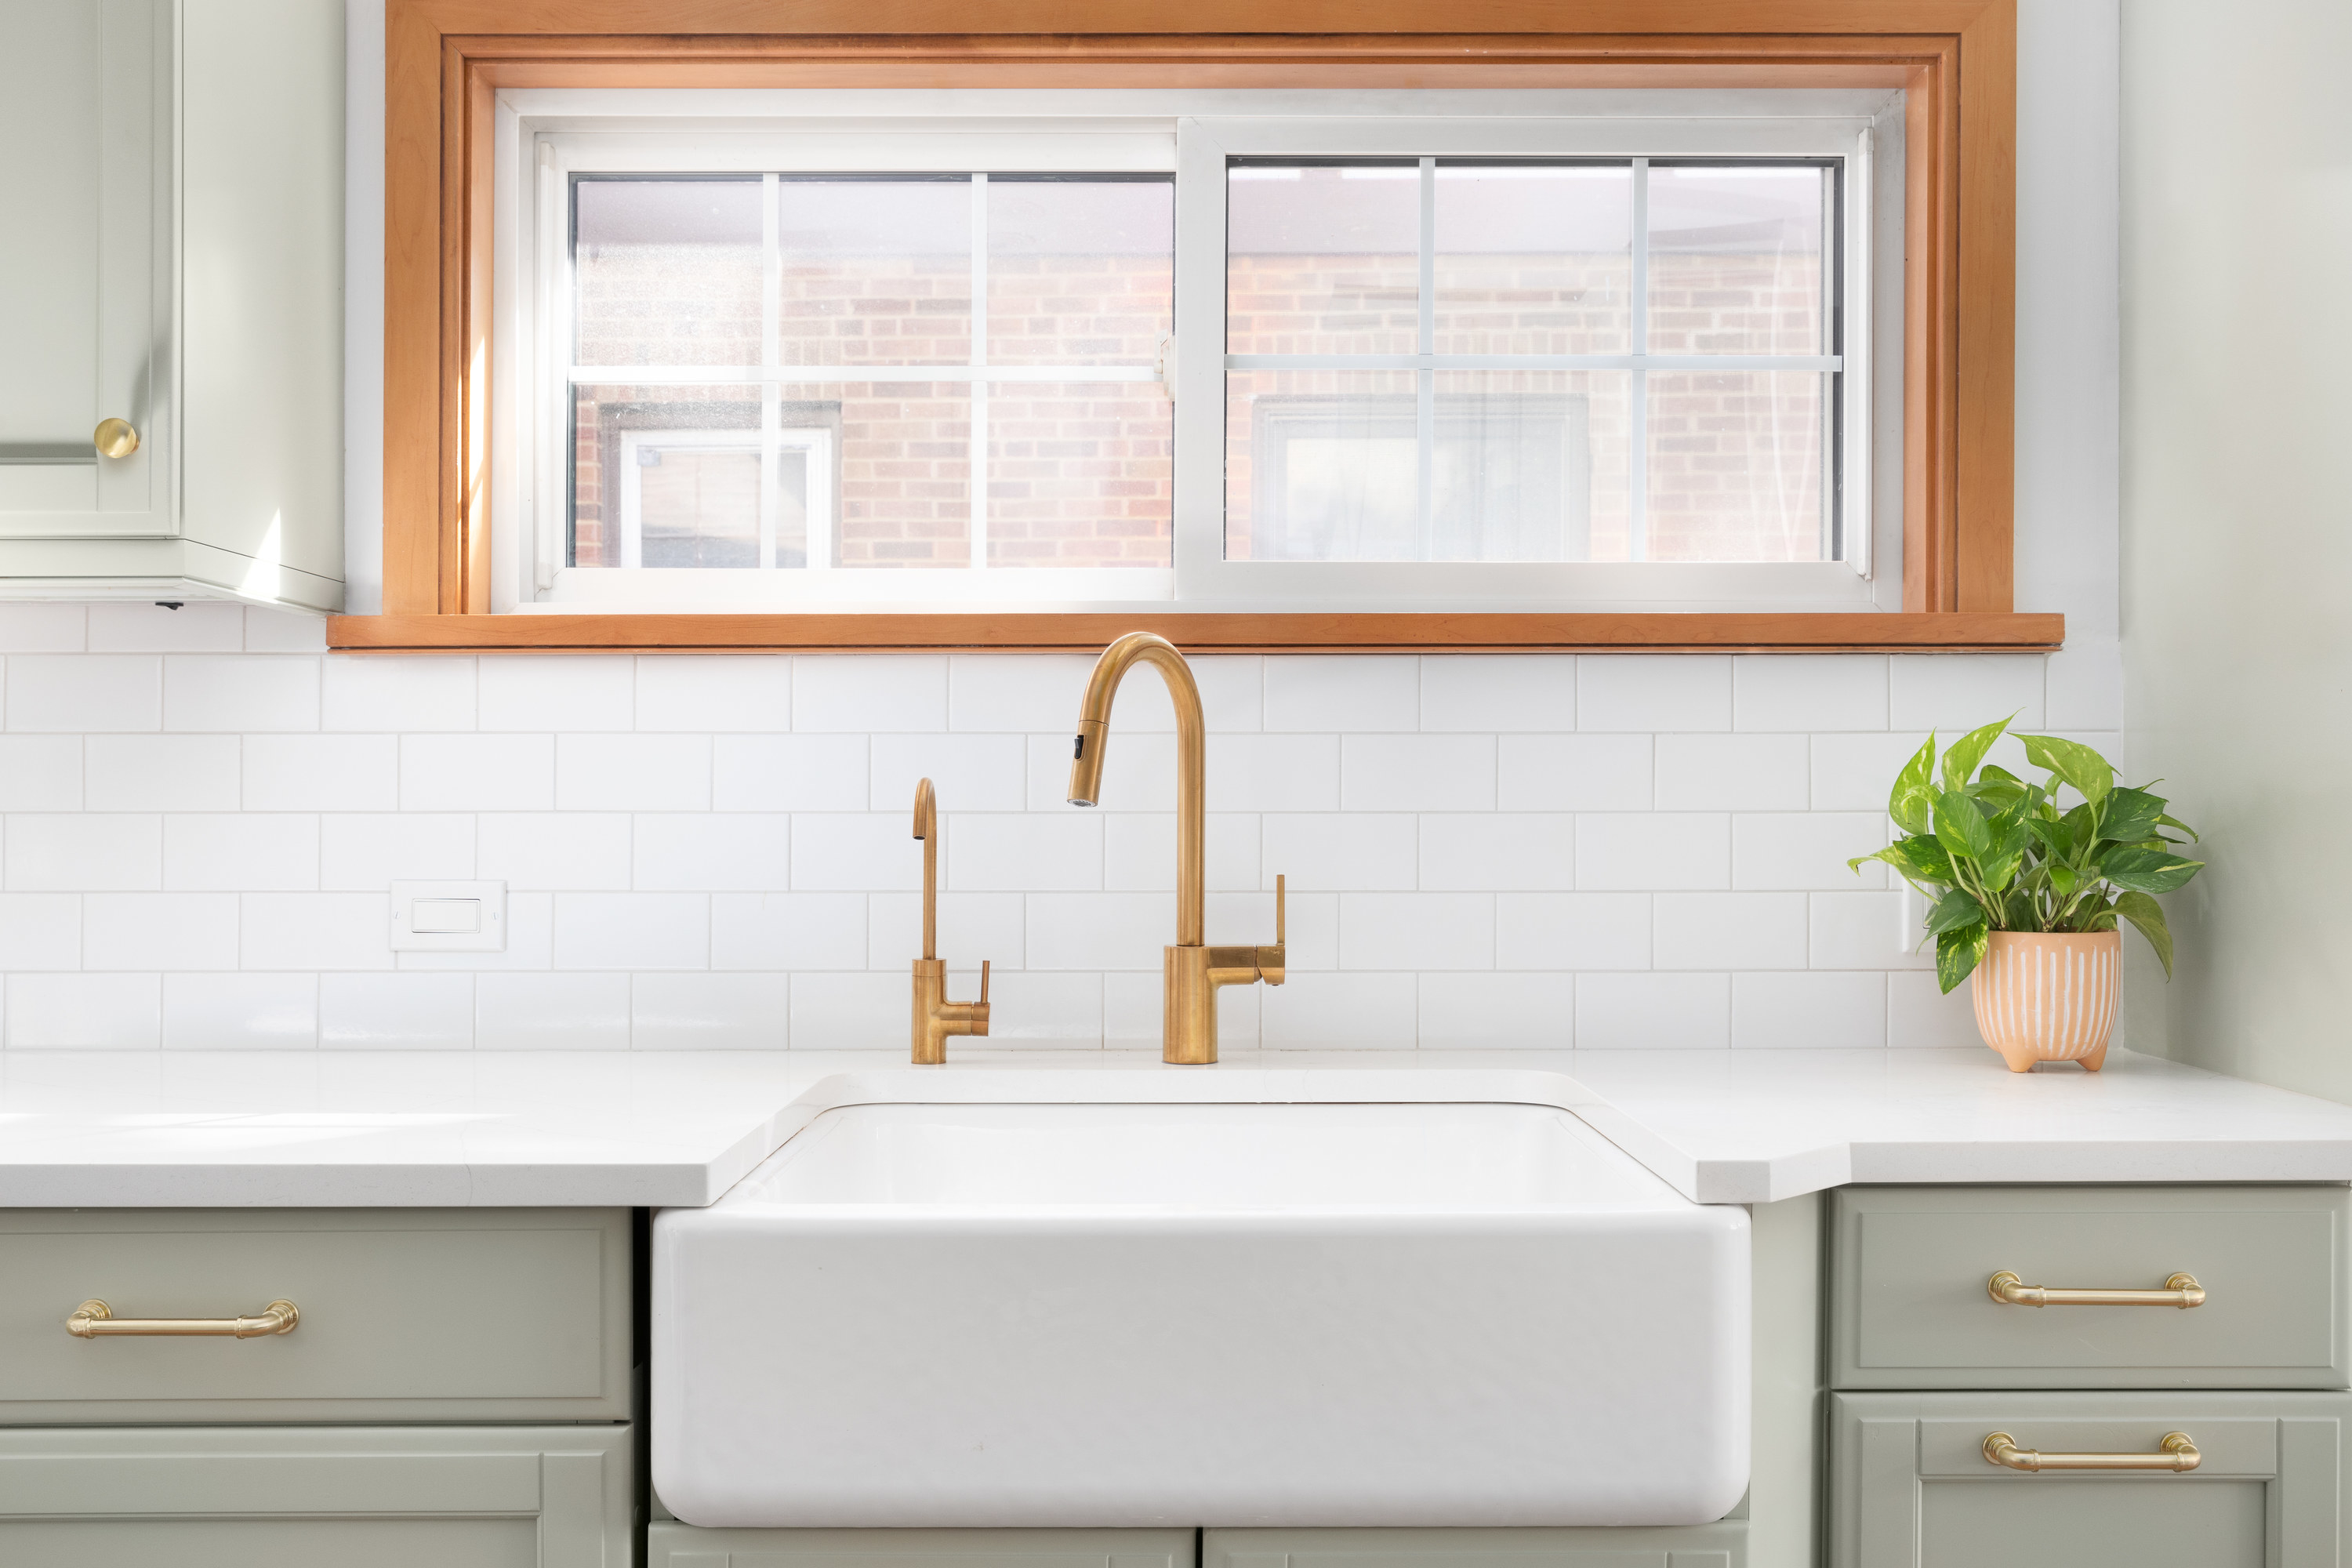 Big single-basin kitchen sink with copper fixtures